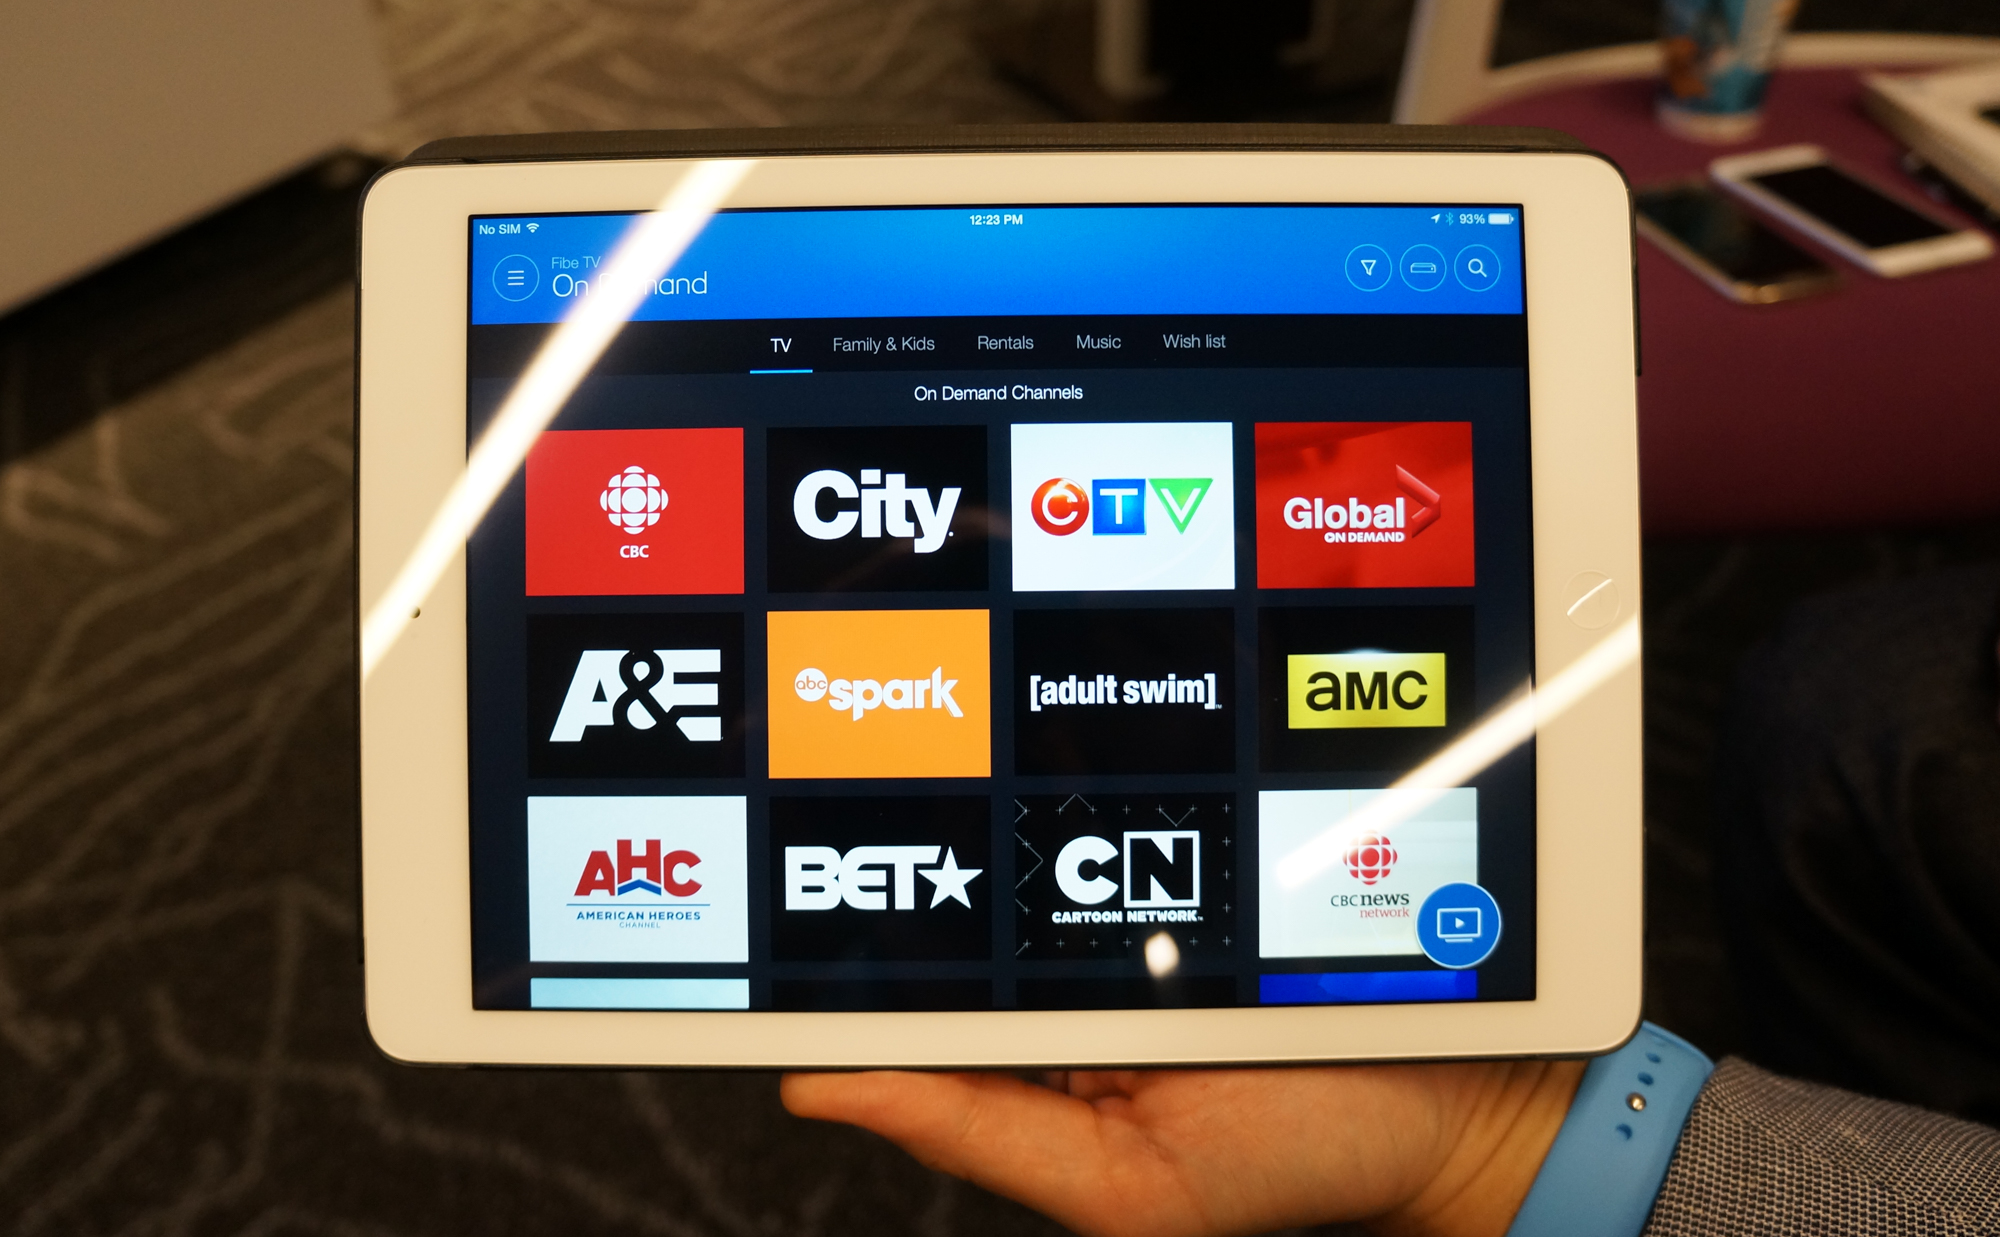 Bell aims to turn tablet into television with new Fibe TV app - MobileSyrup